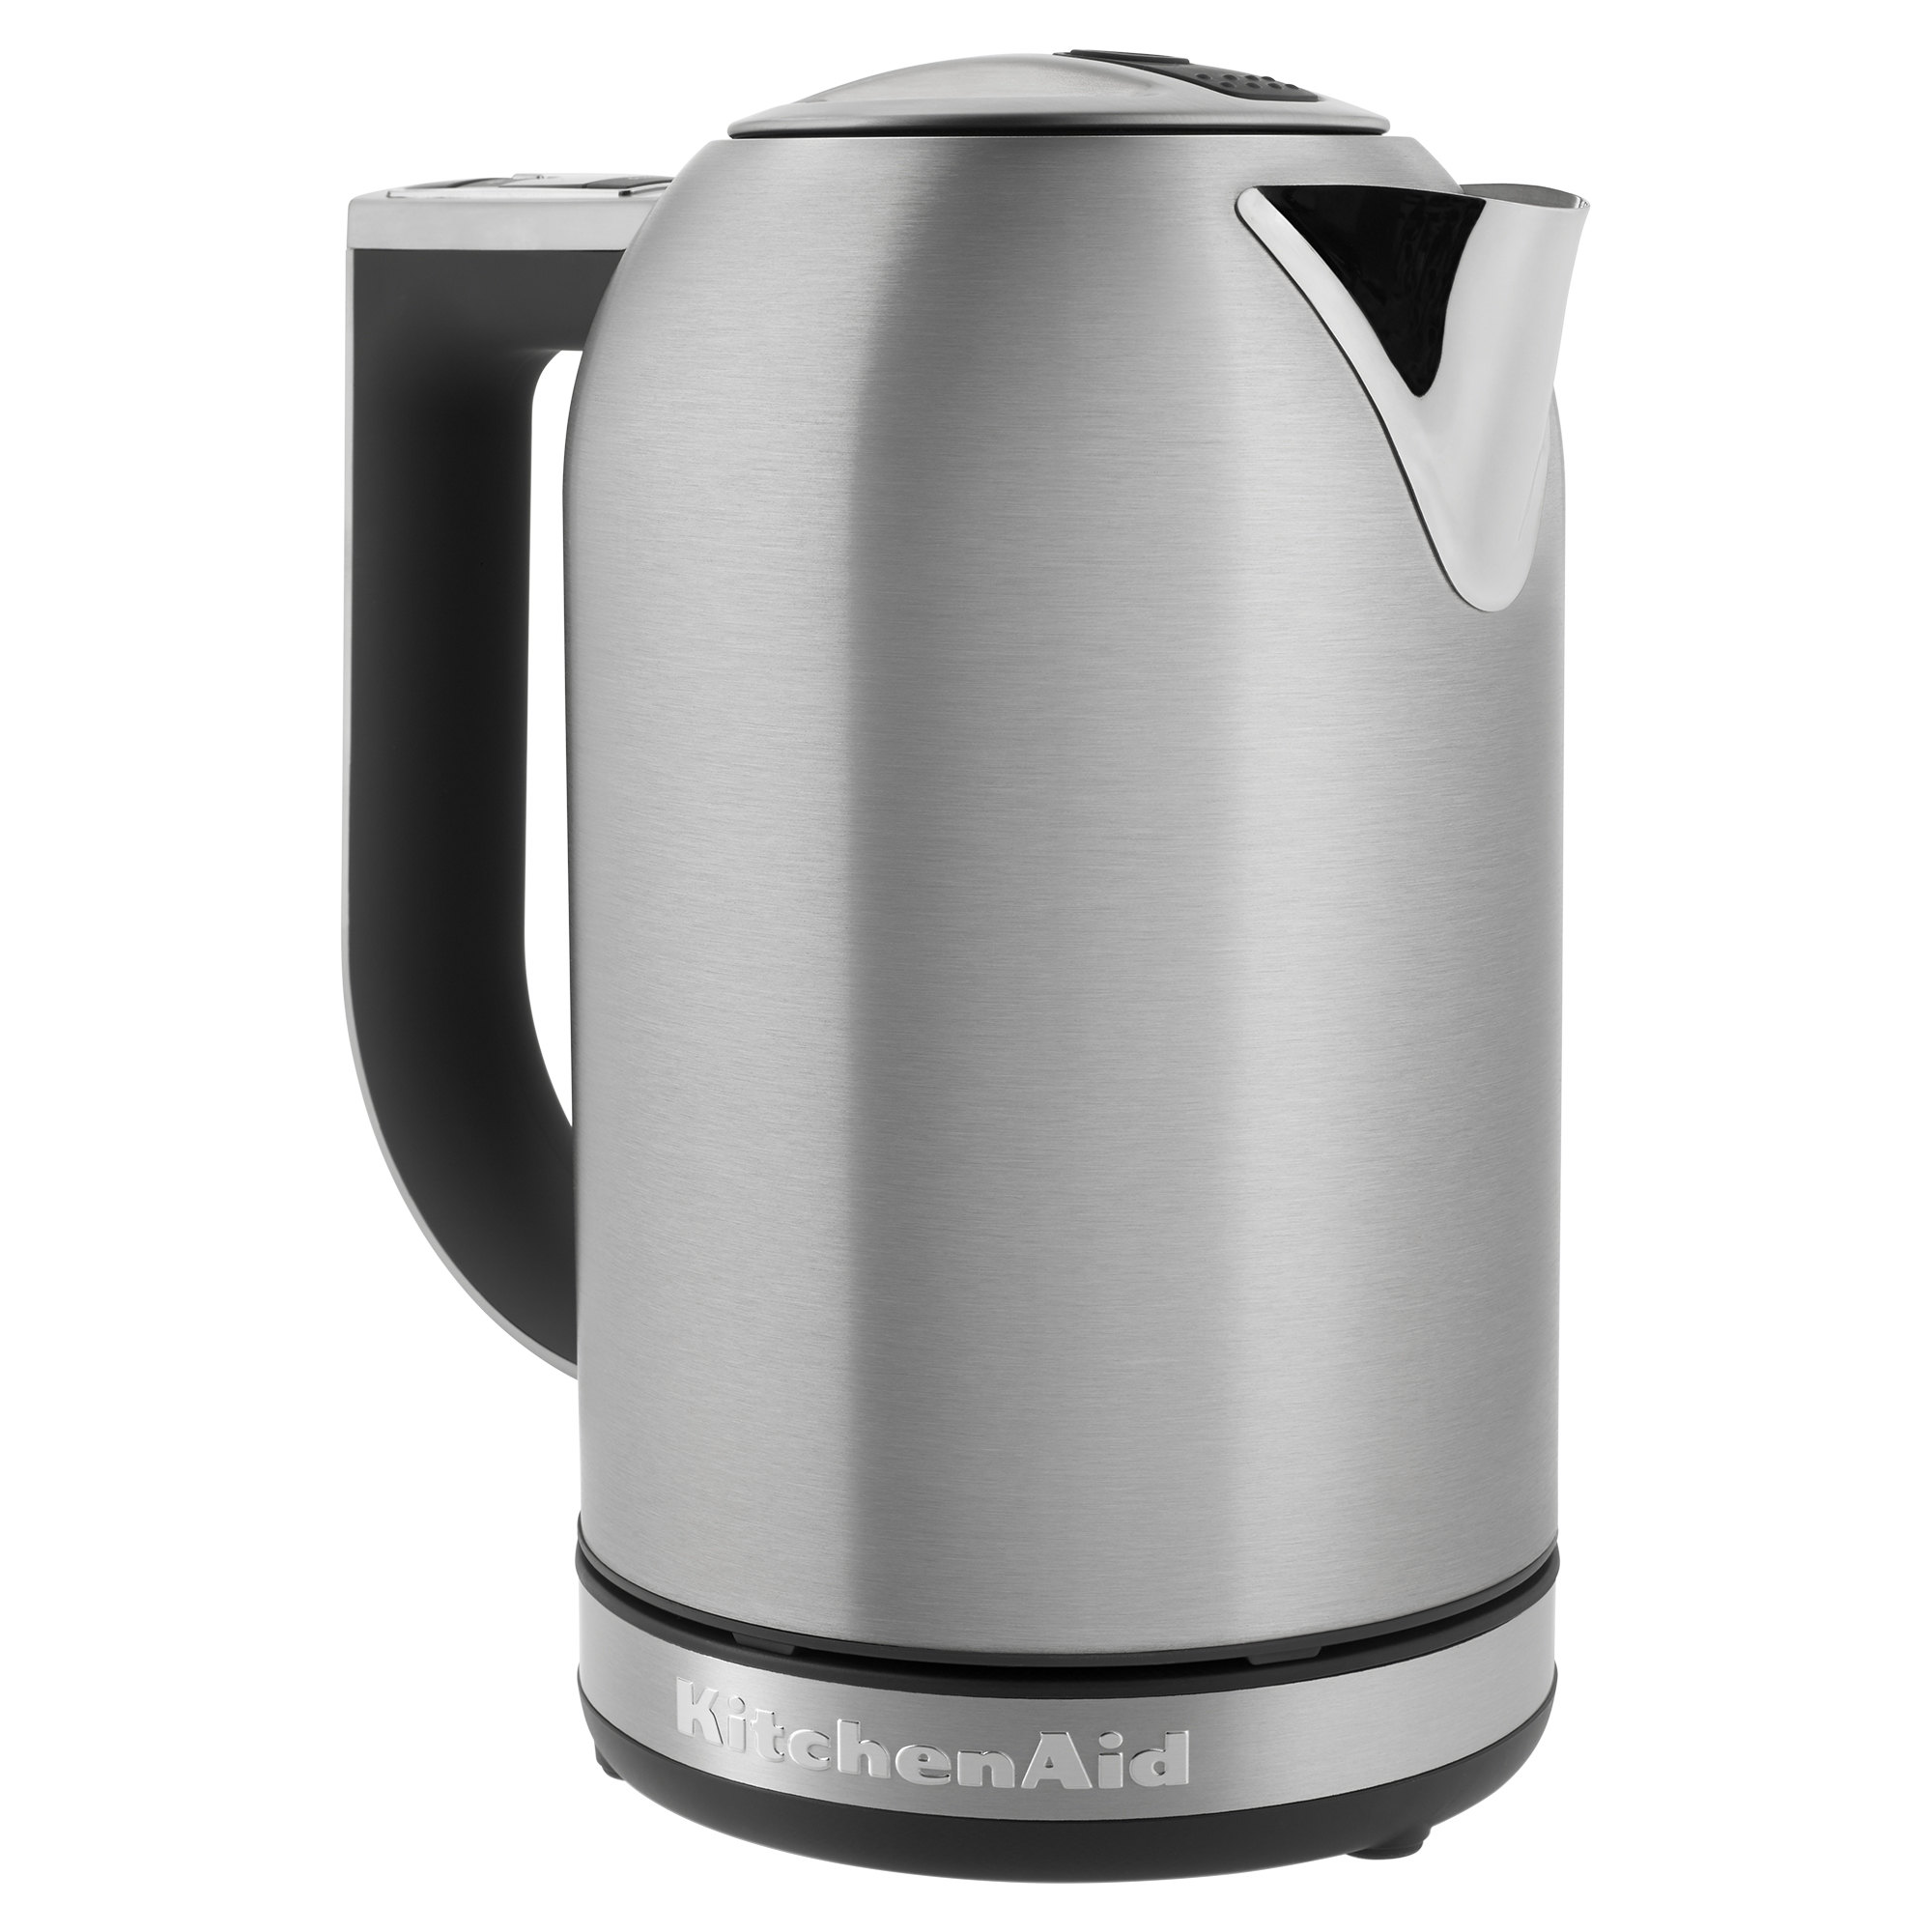 KitchenAid Brushed Stainless Steel Electric Kettle, 1.2 L - Harris